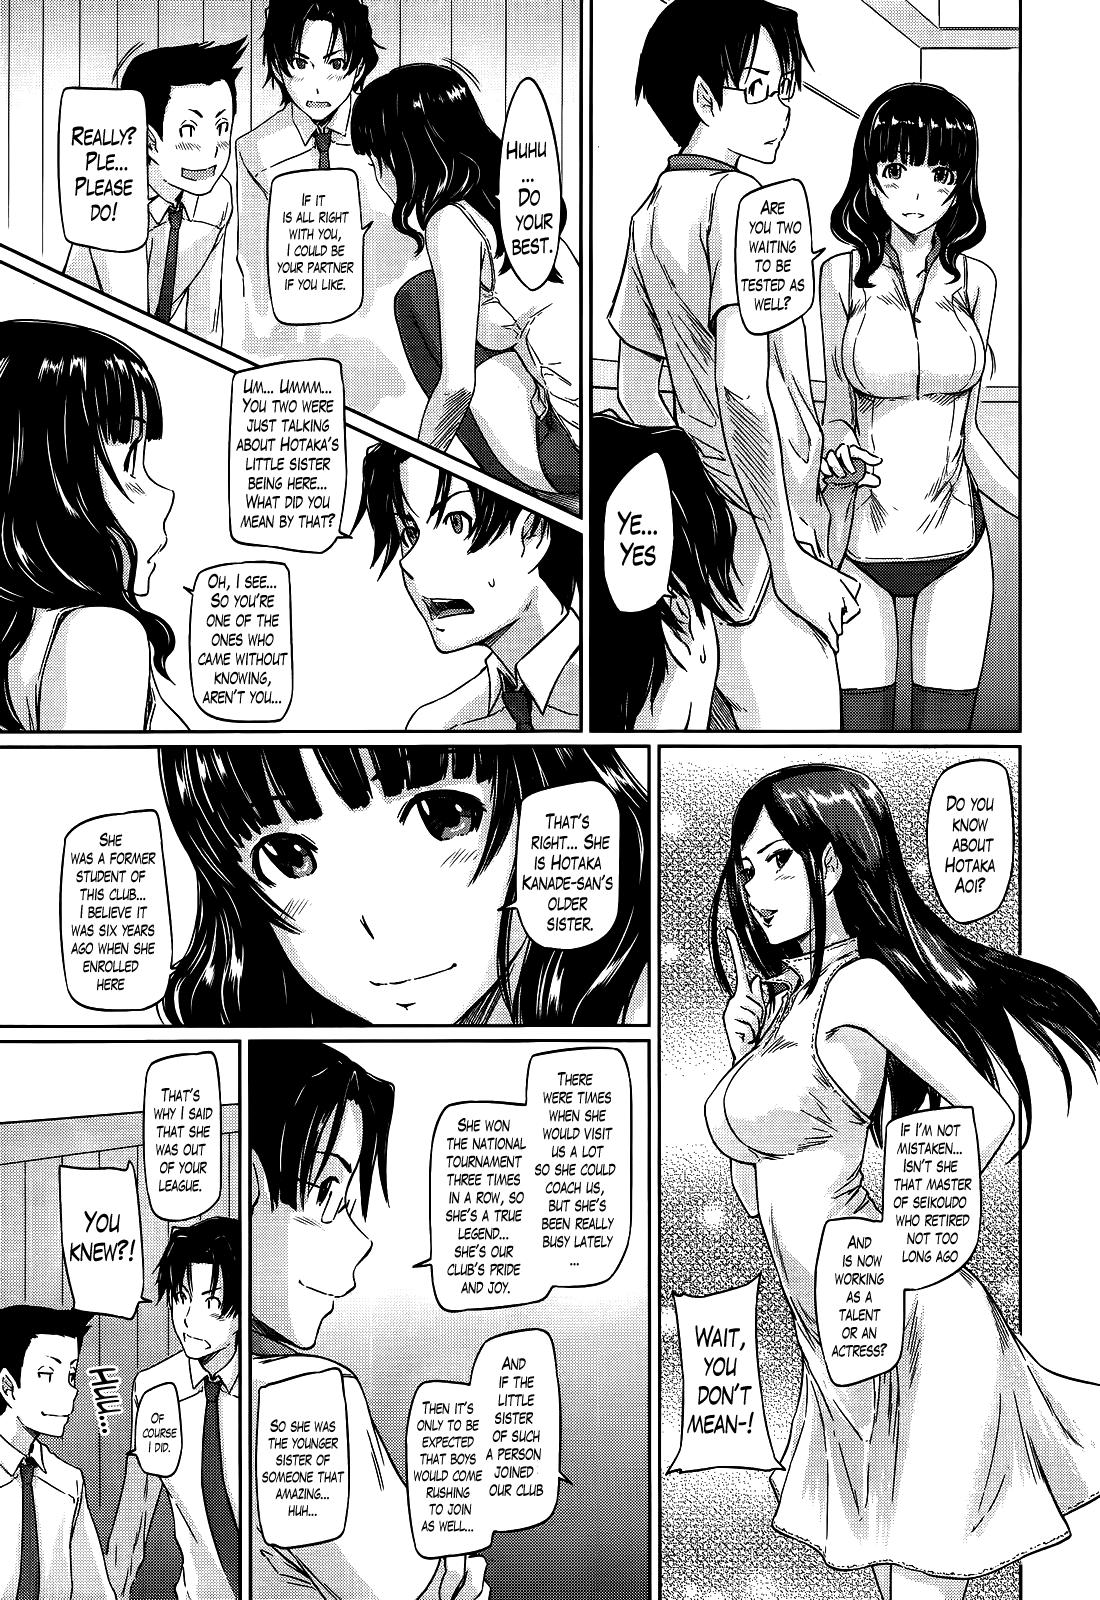 Uniform A Straight Line To Love, chapter 1 Dance - Page 11